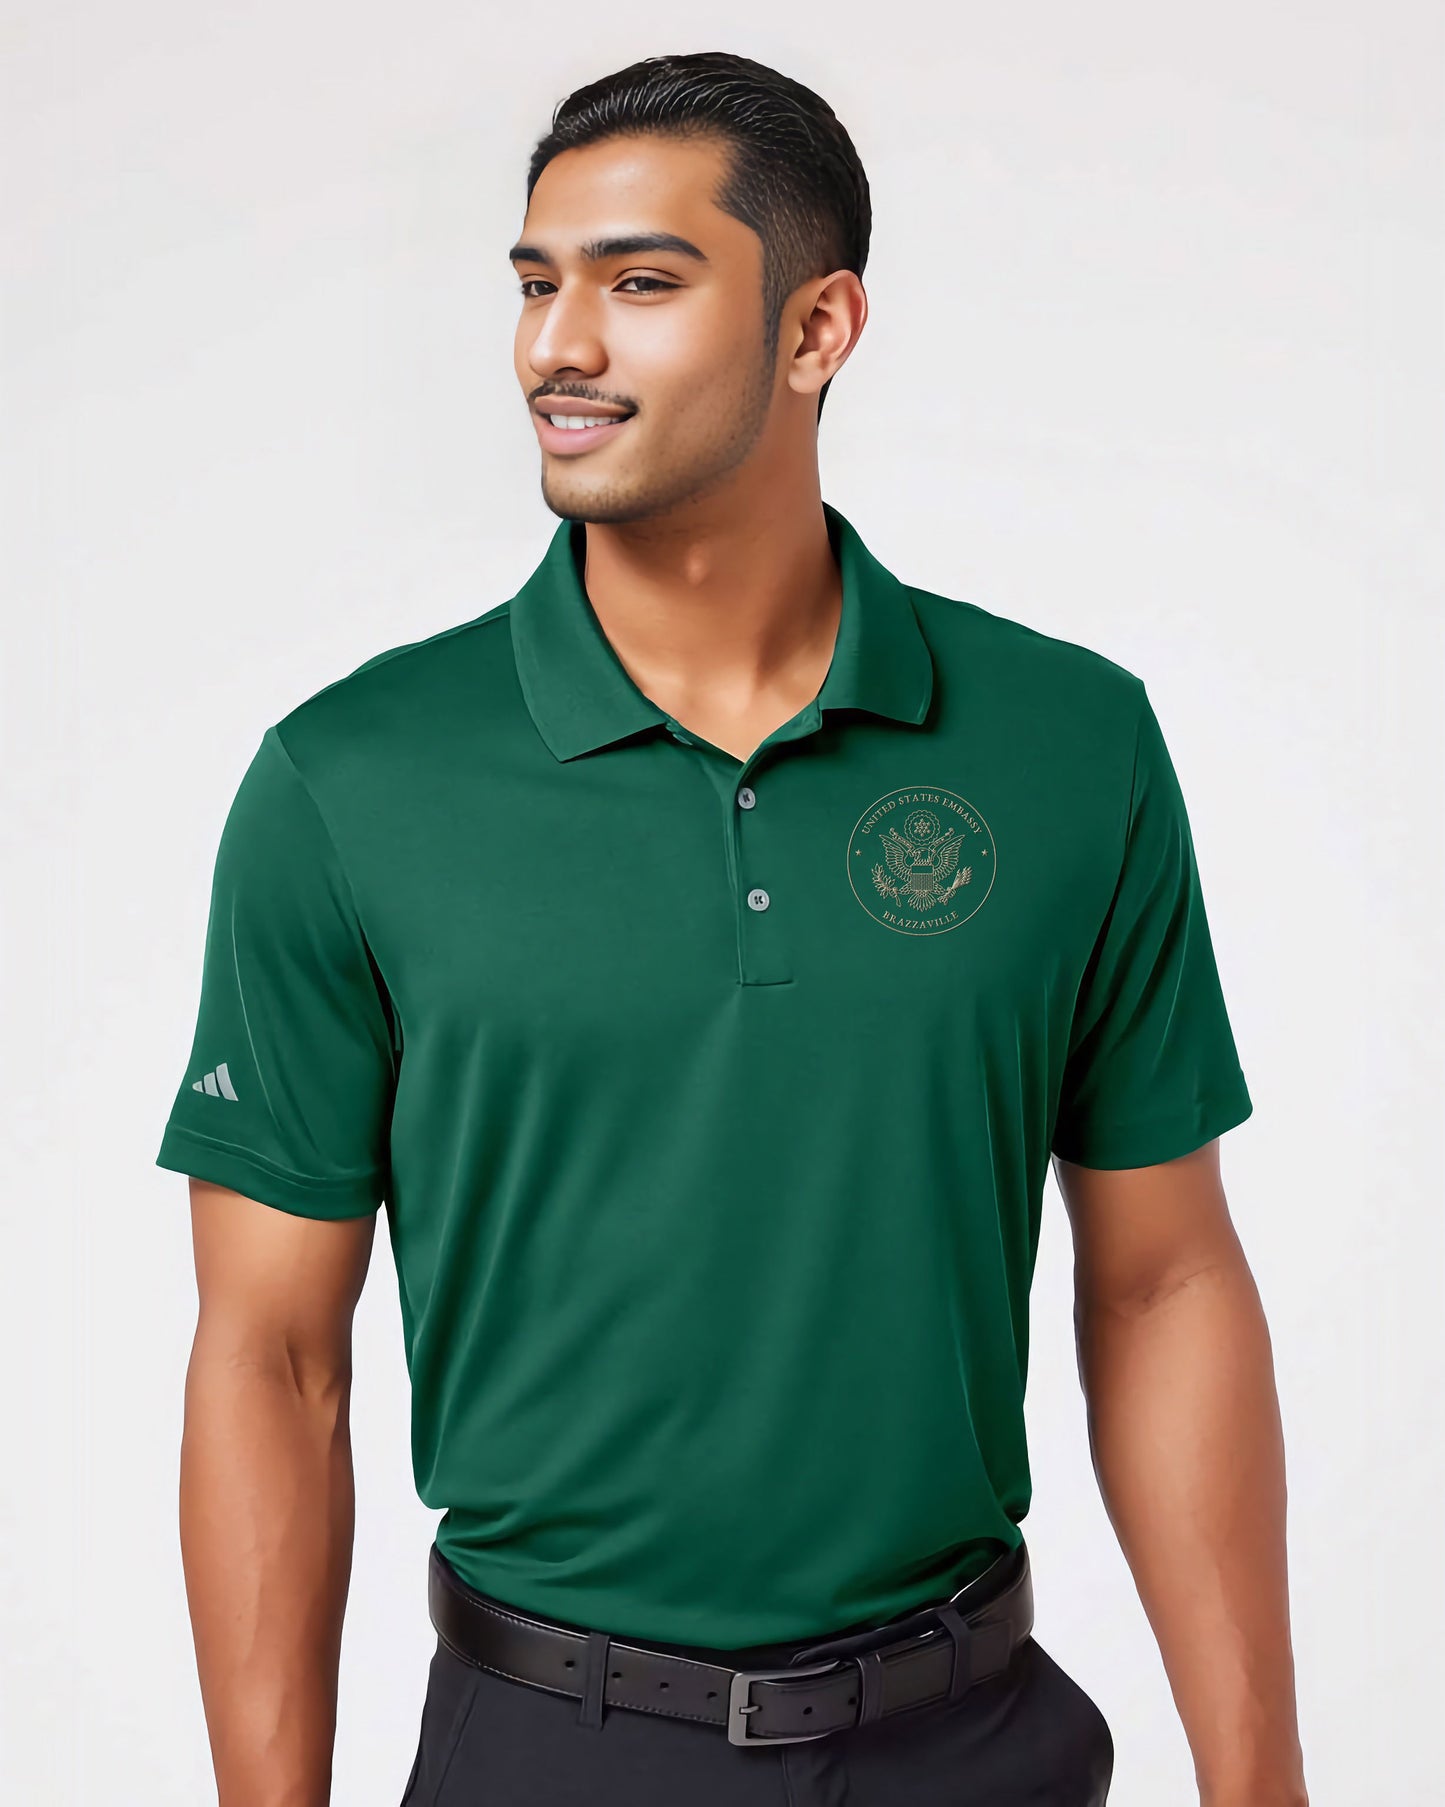 Adidas® Embroidered Polo, Gold Seal: Brazzaville